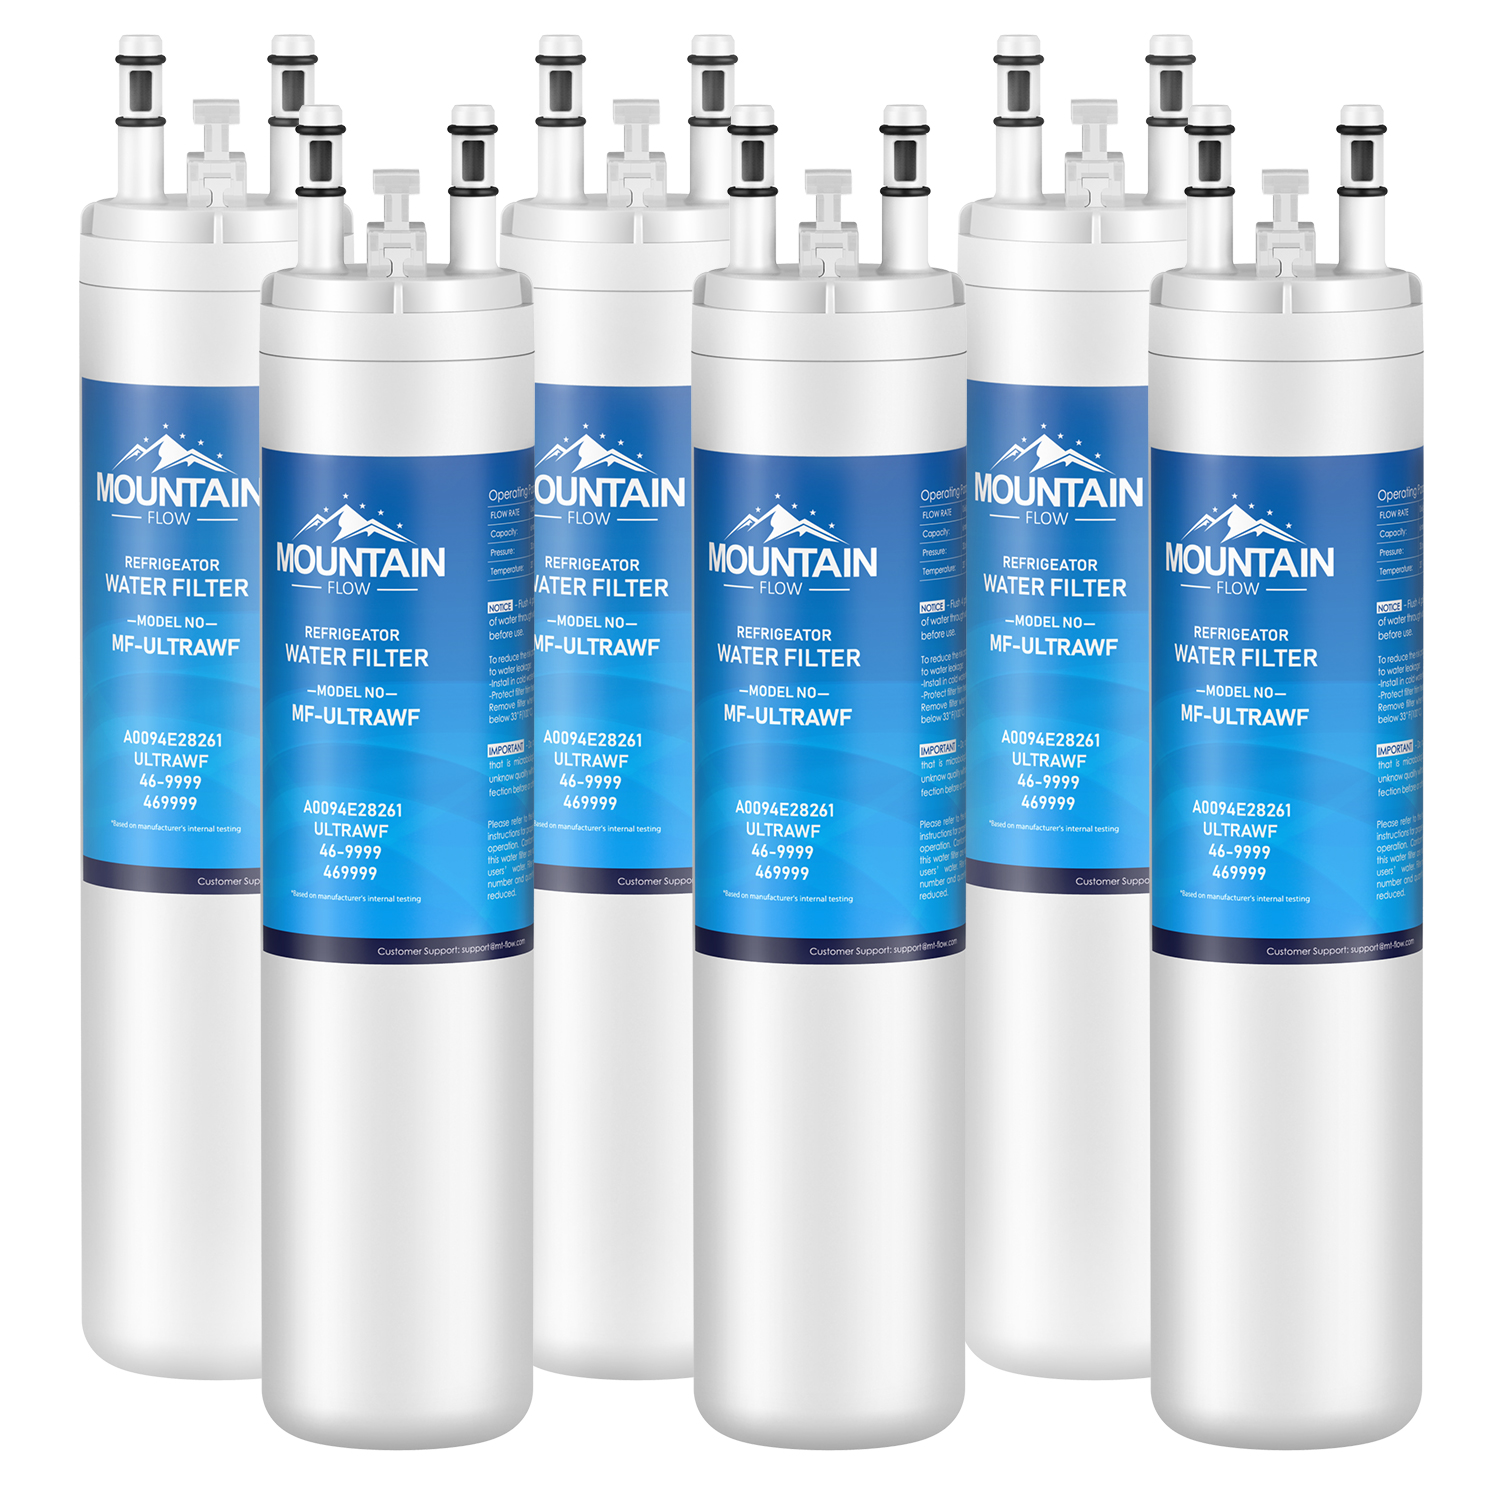 ULTRAWF PureSource Ultra Water Filter Compatible with 46-9999, 6Packs